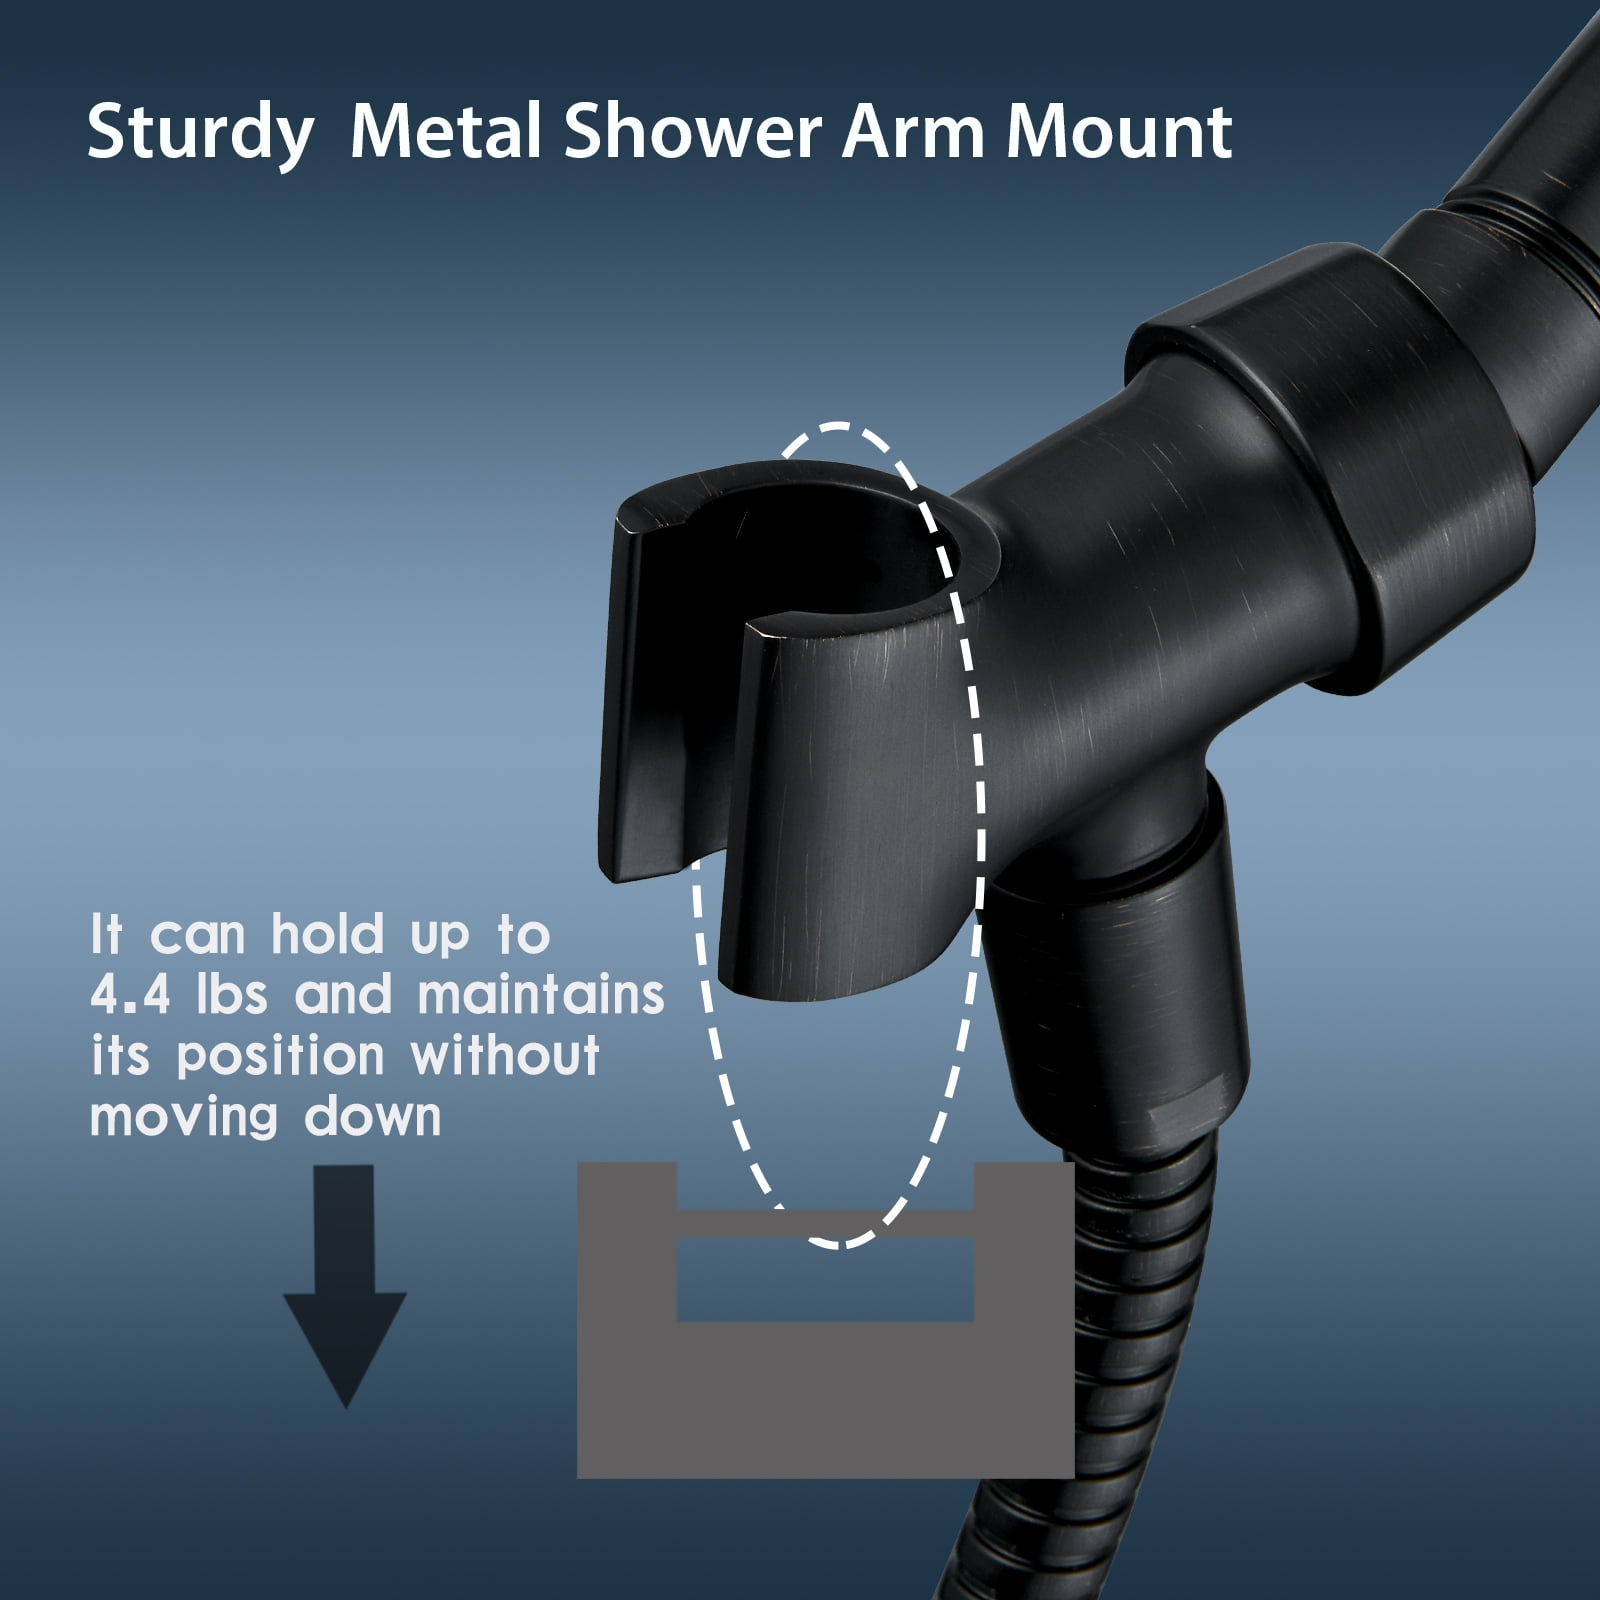 BRIGHT SHOWERS All Metal Shower Head Holder for Handheld Shower Head,  Adjustable Shower Arm Mount with Universal Wall Hook Bracket (BBA1901)